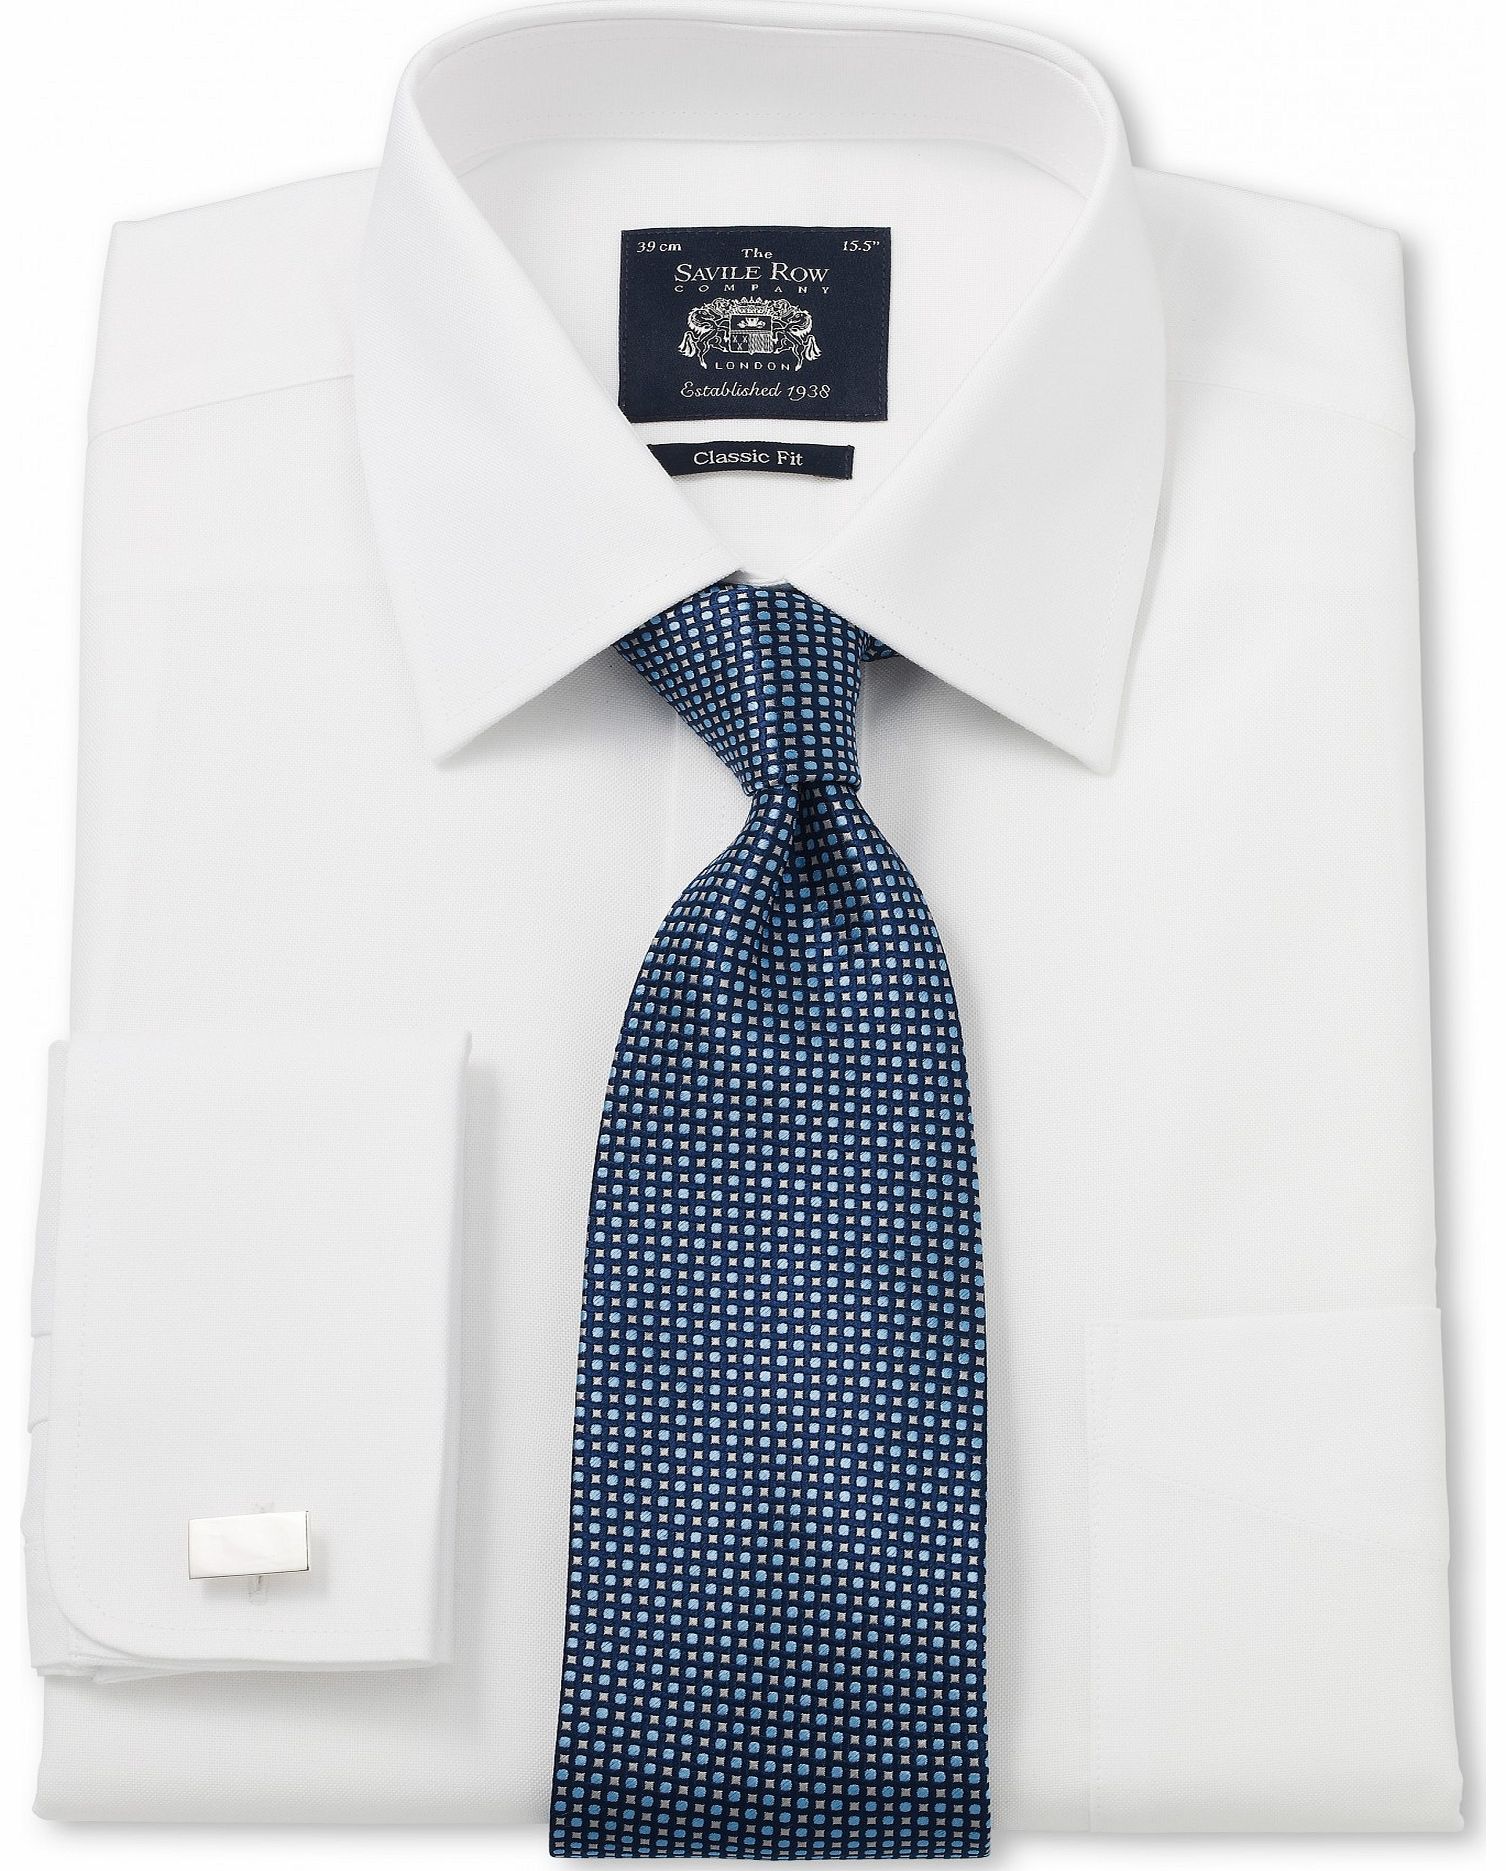 Savile Row Company White Pin Point Windsor Collar Classic Fit Shirt